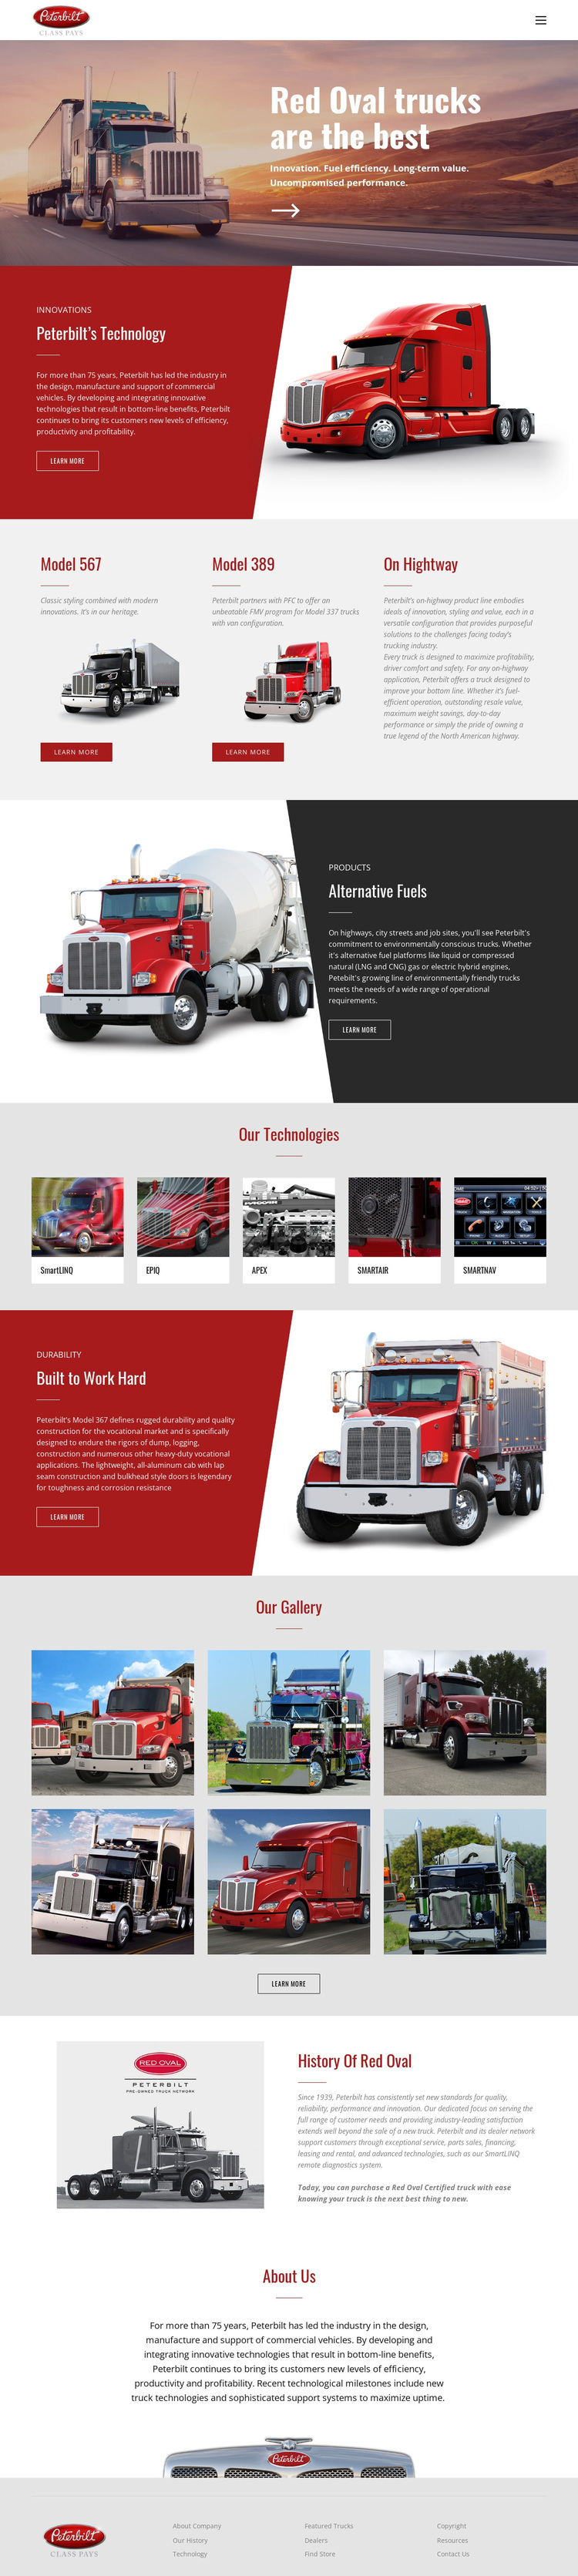 Red oval truck transportaion Joomla Page Builder